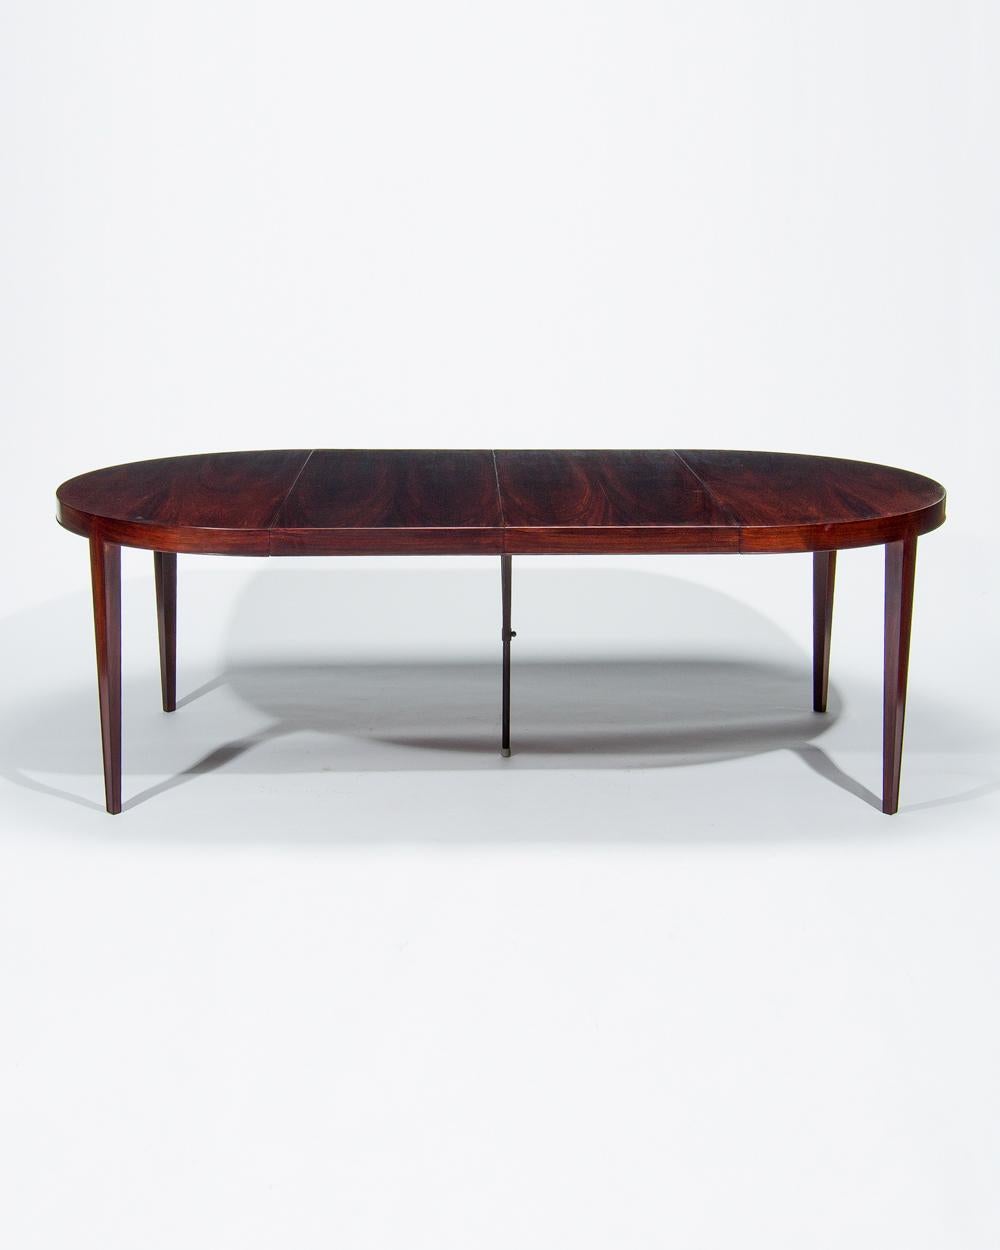 Mid-20th Century Danish Rosewood Dining Table by Severin Hansen, Midcentury Design, 1960s For Sale